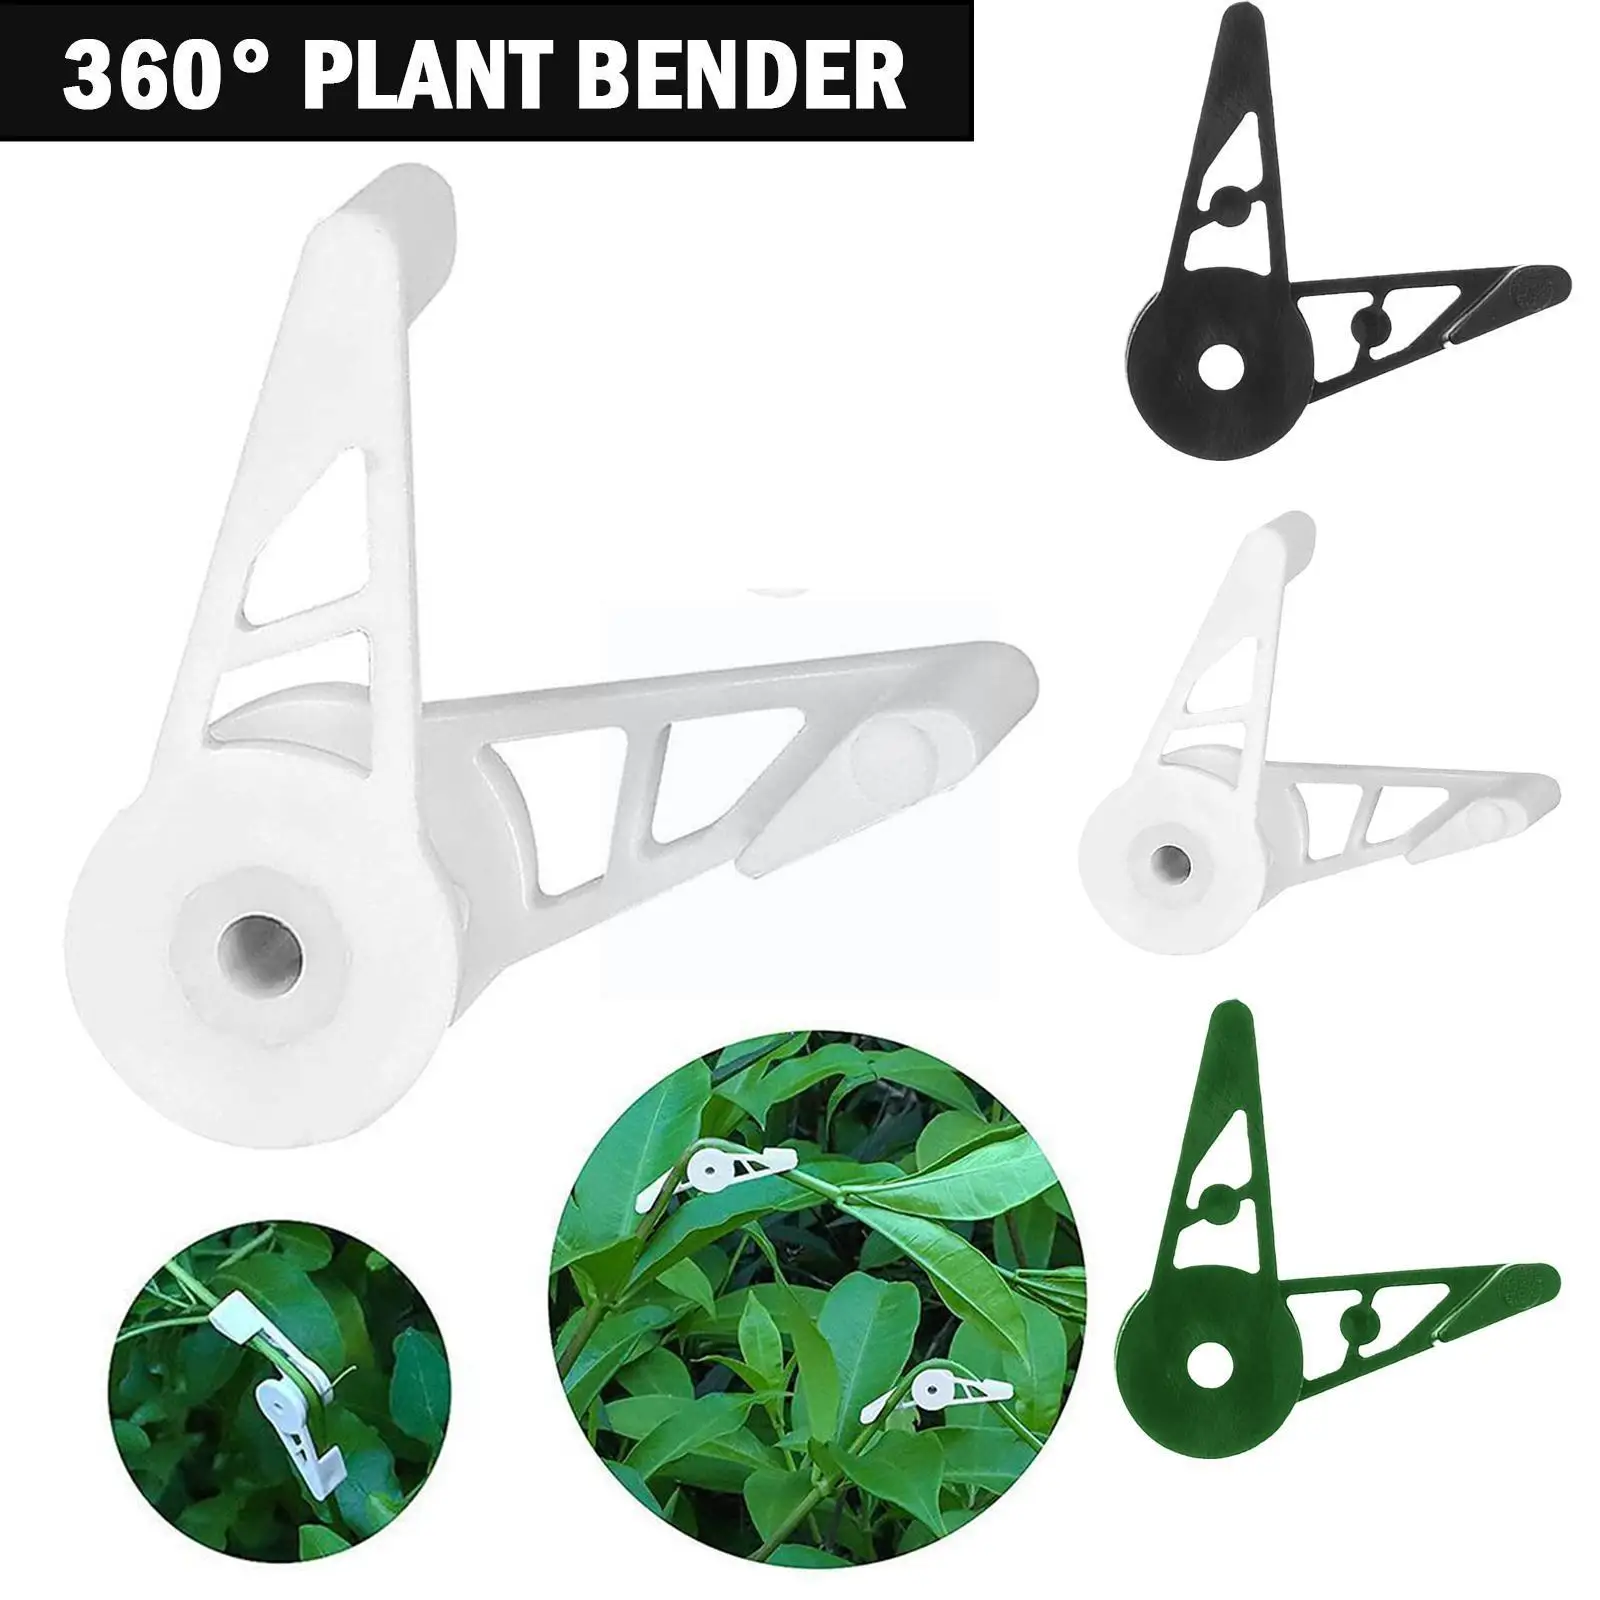 1 Pcs 360 Degree Adjustable Plant Trainer Clips Trees Branches Bender For Bonsai Nursery Stock Low Stress Training Control Y0E5